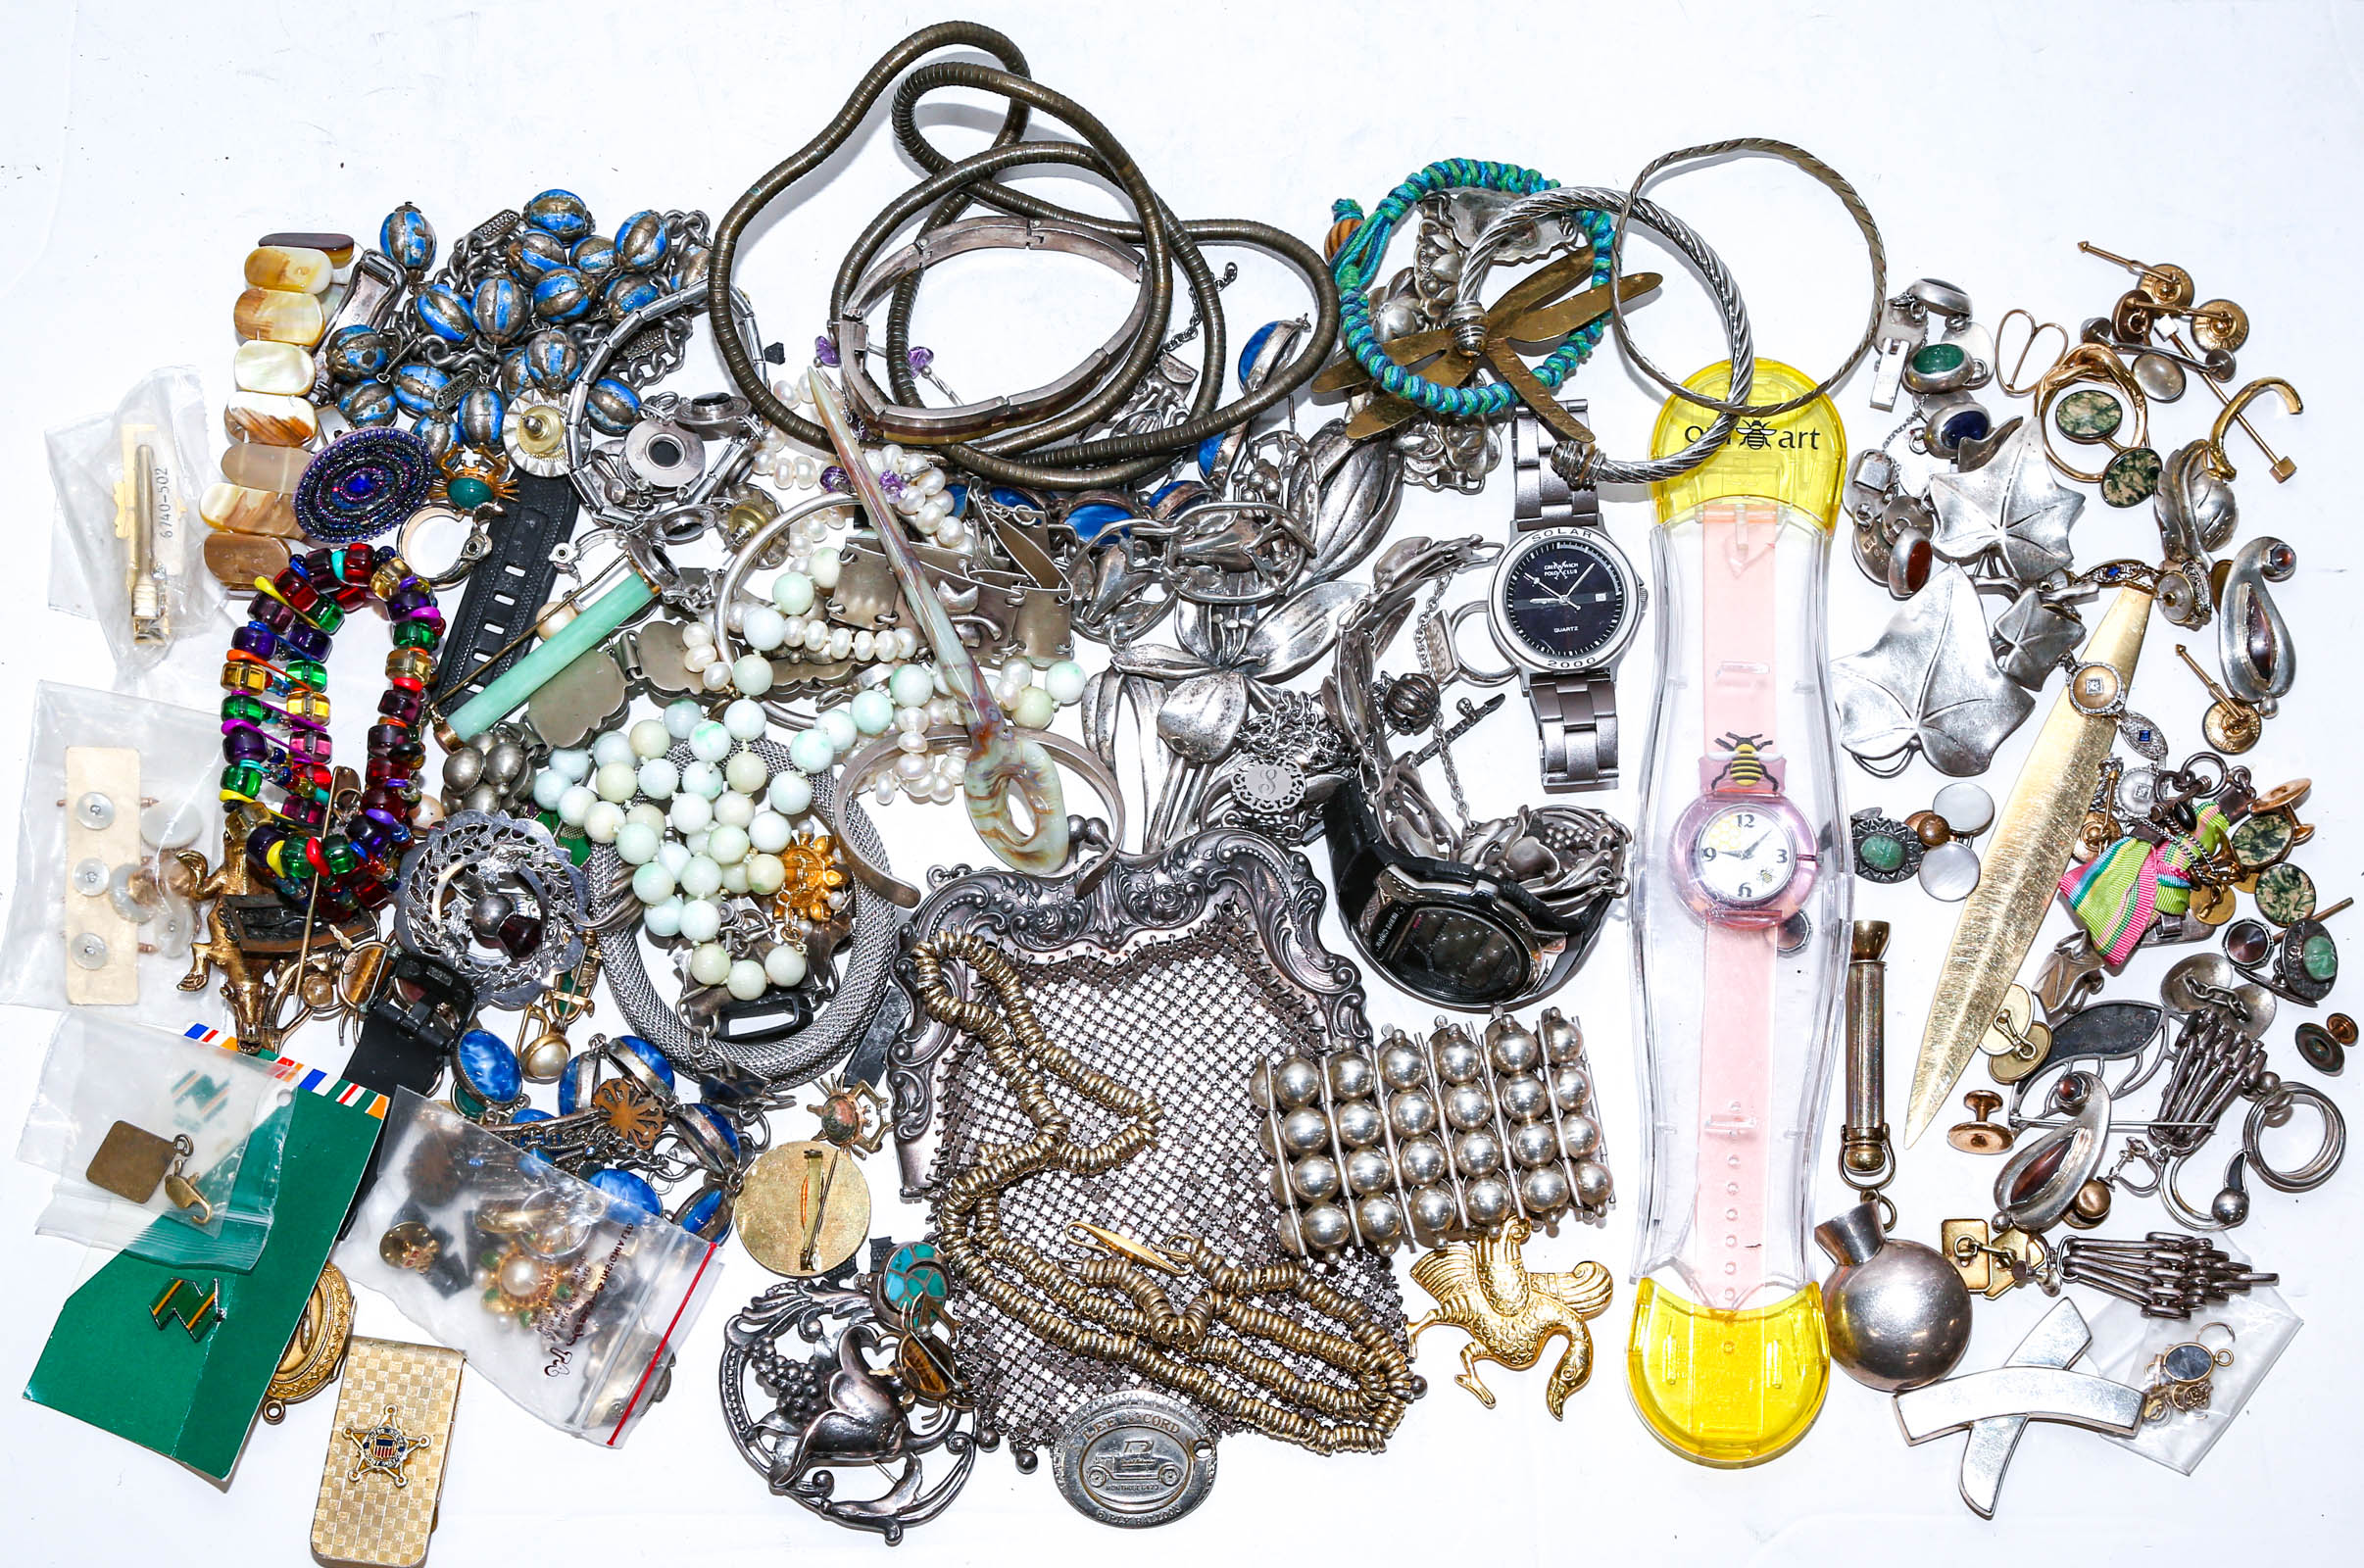 A LARGE COLLECTION OF VINTAGE JEWELRY 369d36